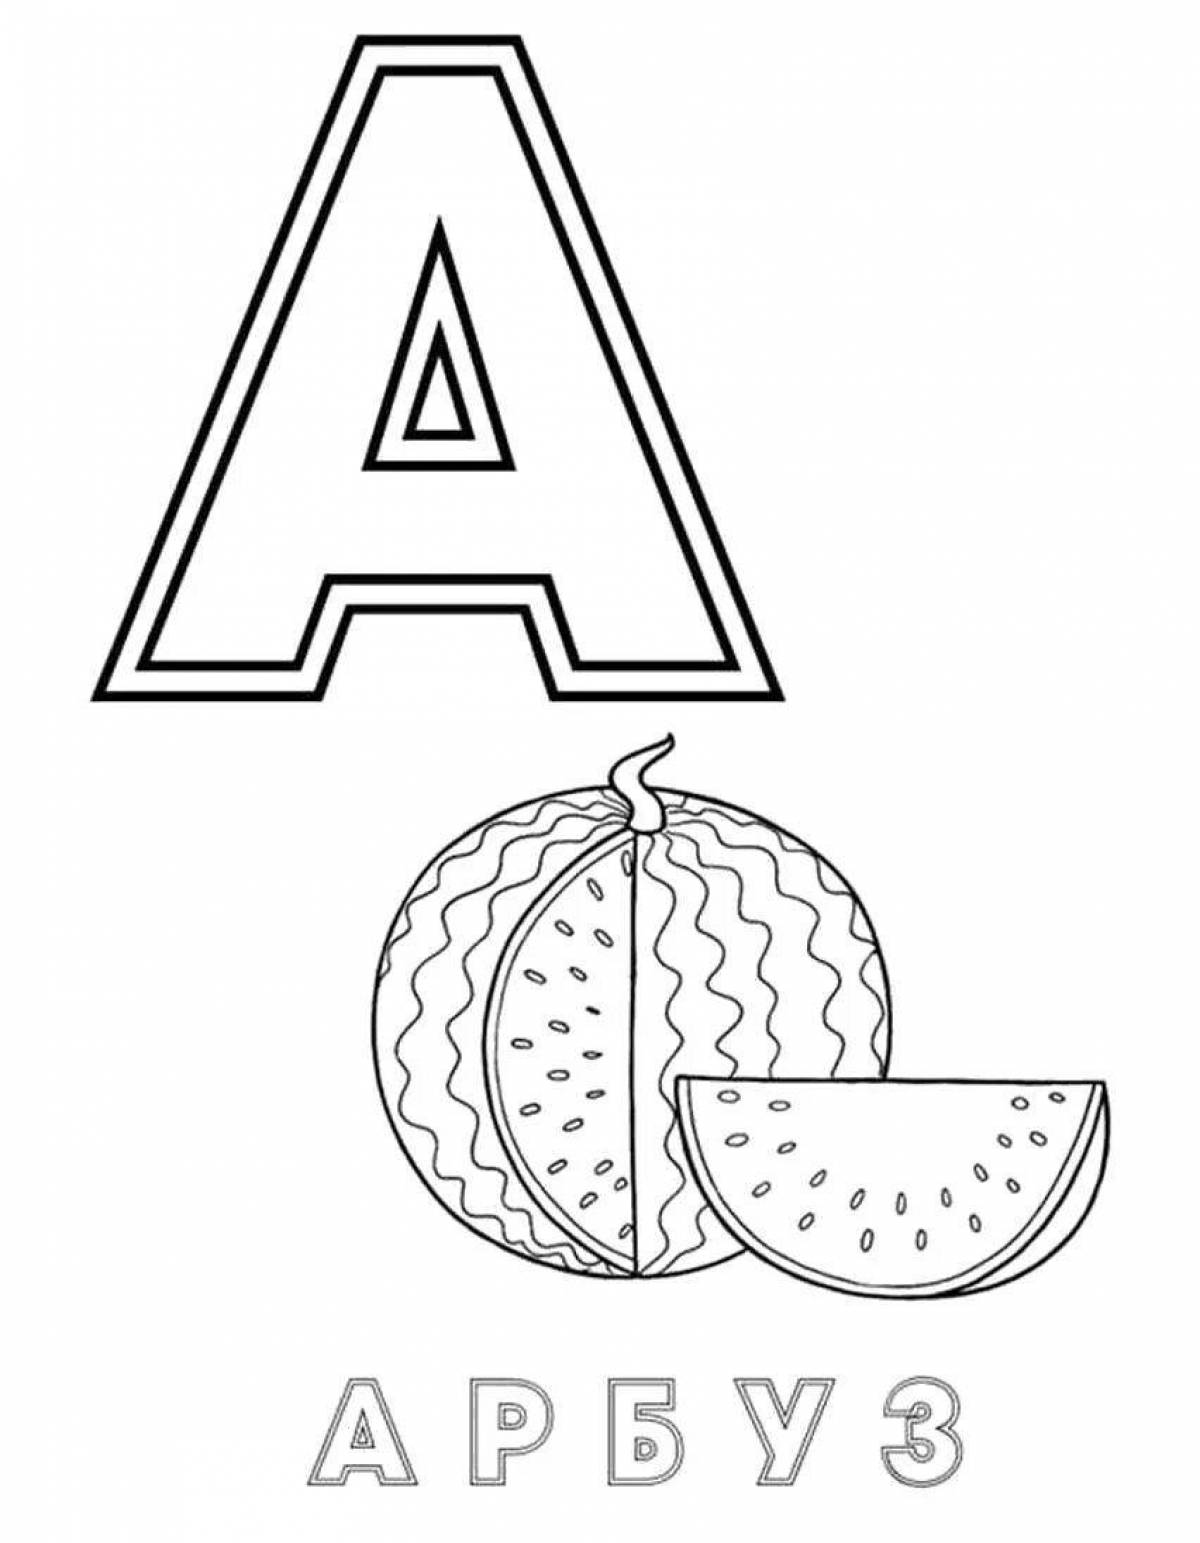 Adorable Russian alphabet coloring book for kids